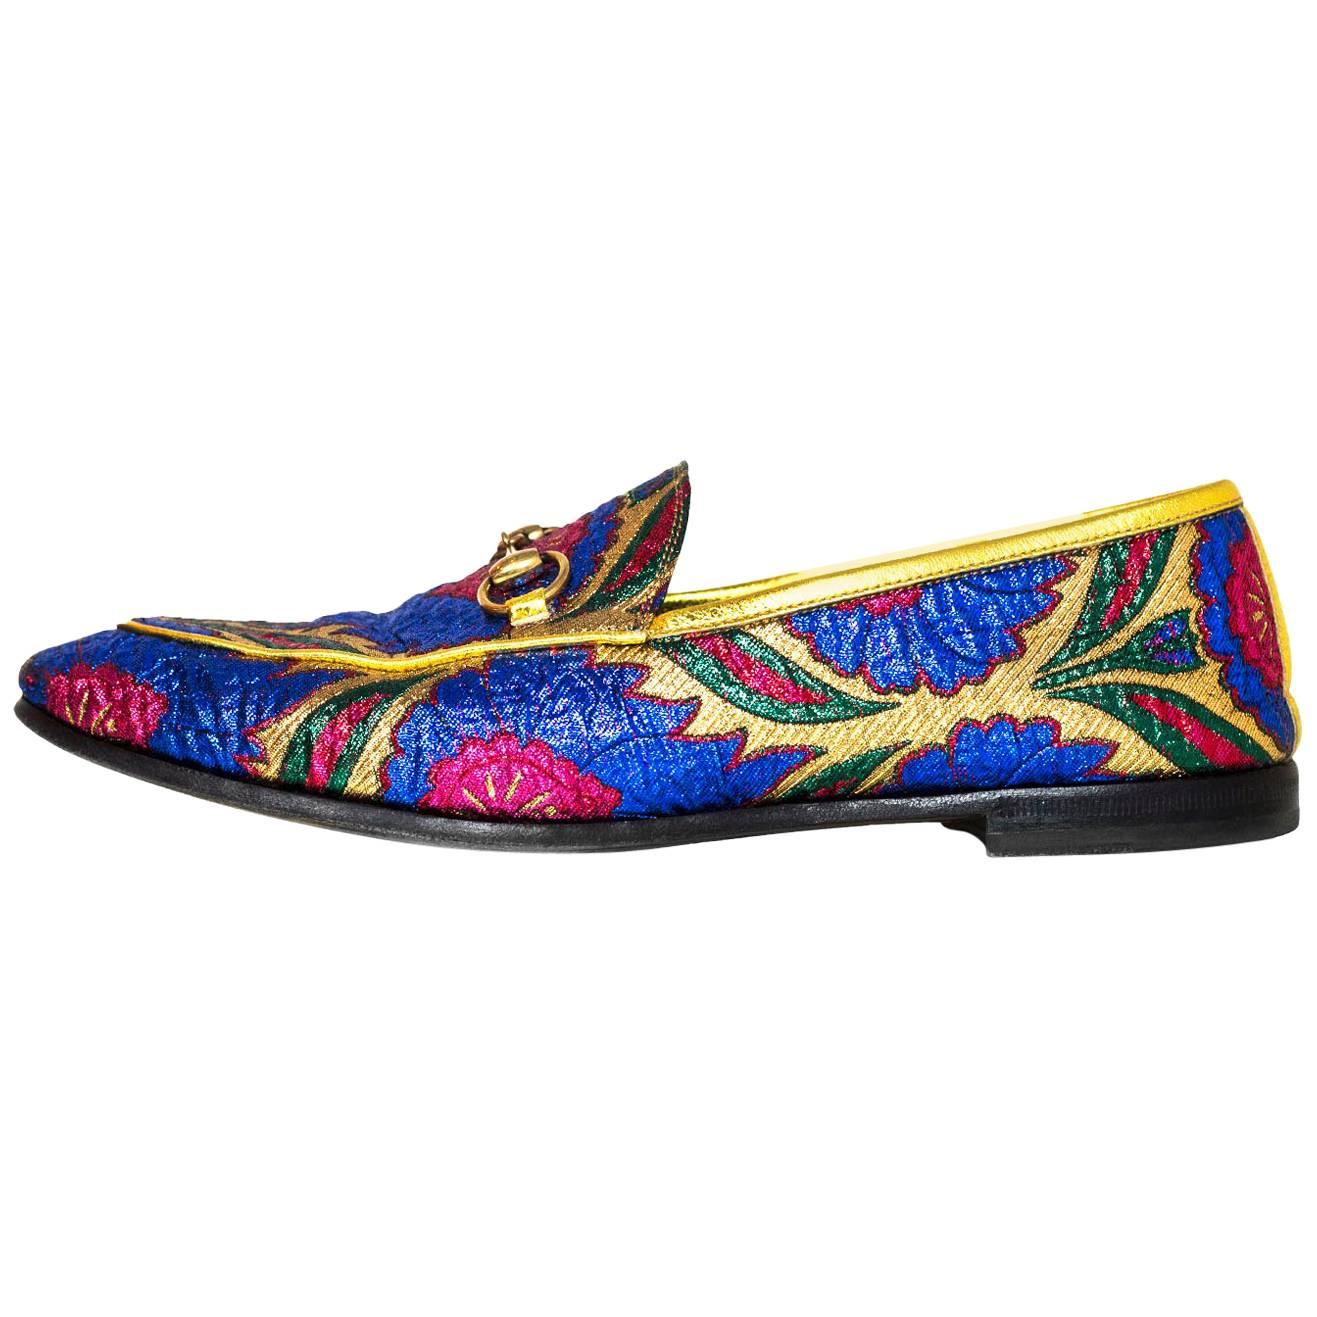 Gucci Brocade Multi-Colored Loafers Sz 38 with Box and DB